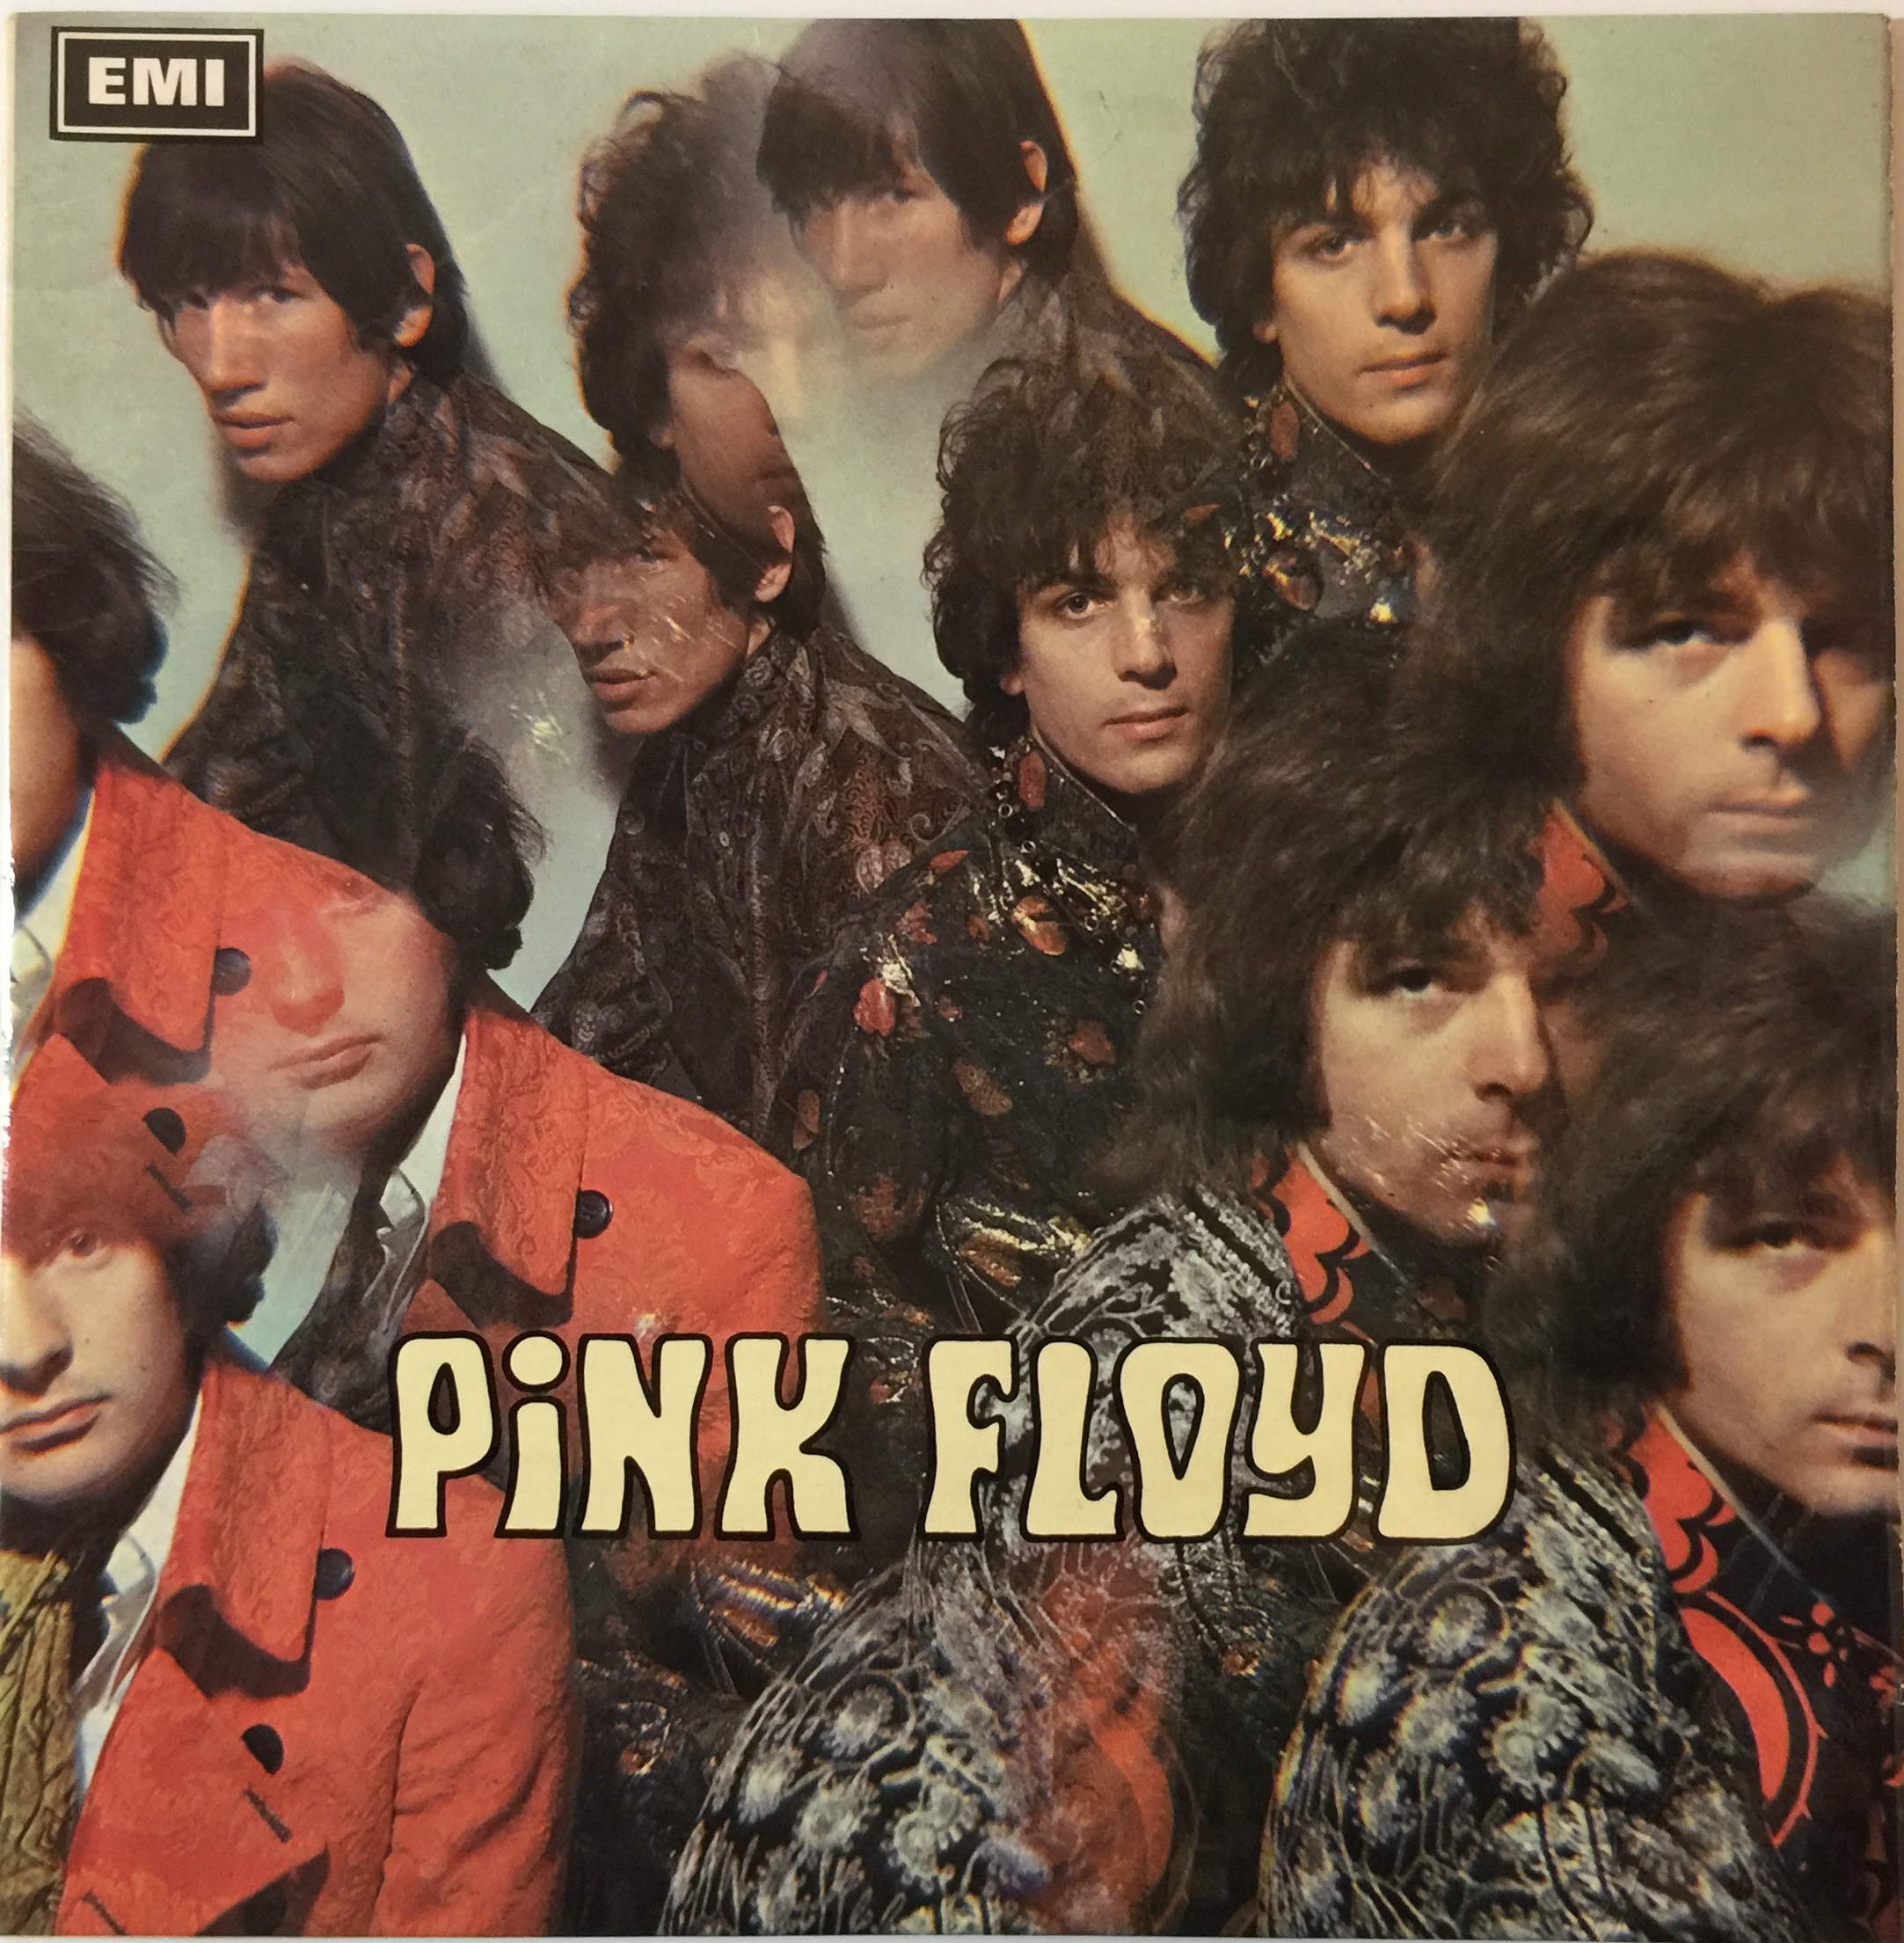 PINK FLOYD - THE PIPER AT THE GATES OF DAWN LP (ORIGINAL UK STEREO PRESSING - COLUMBIA SCX 6157).